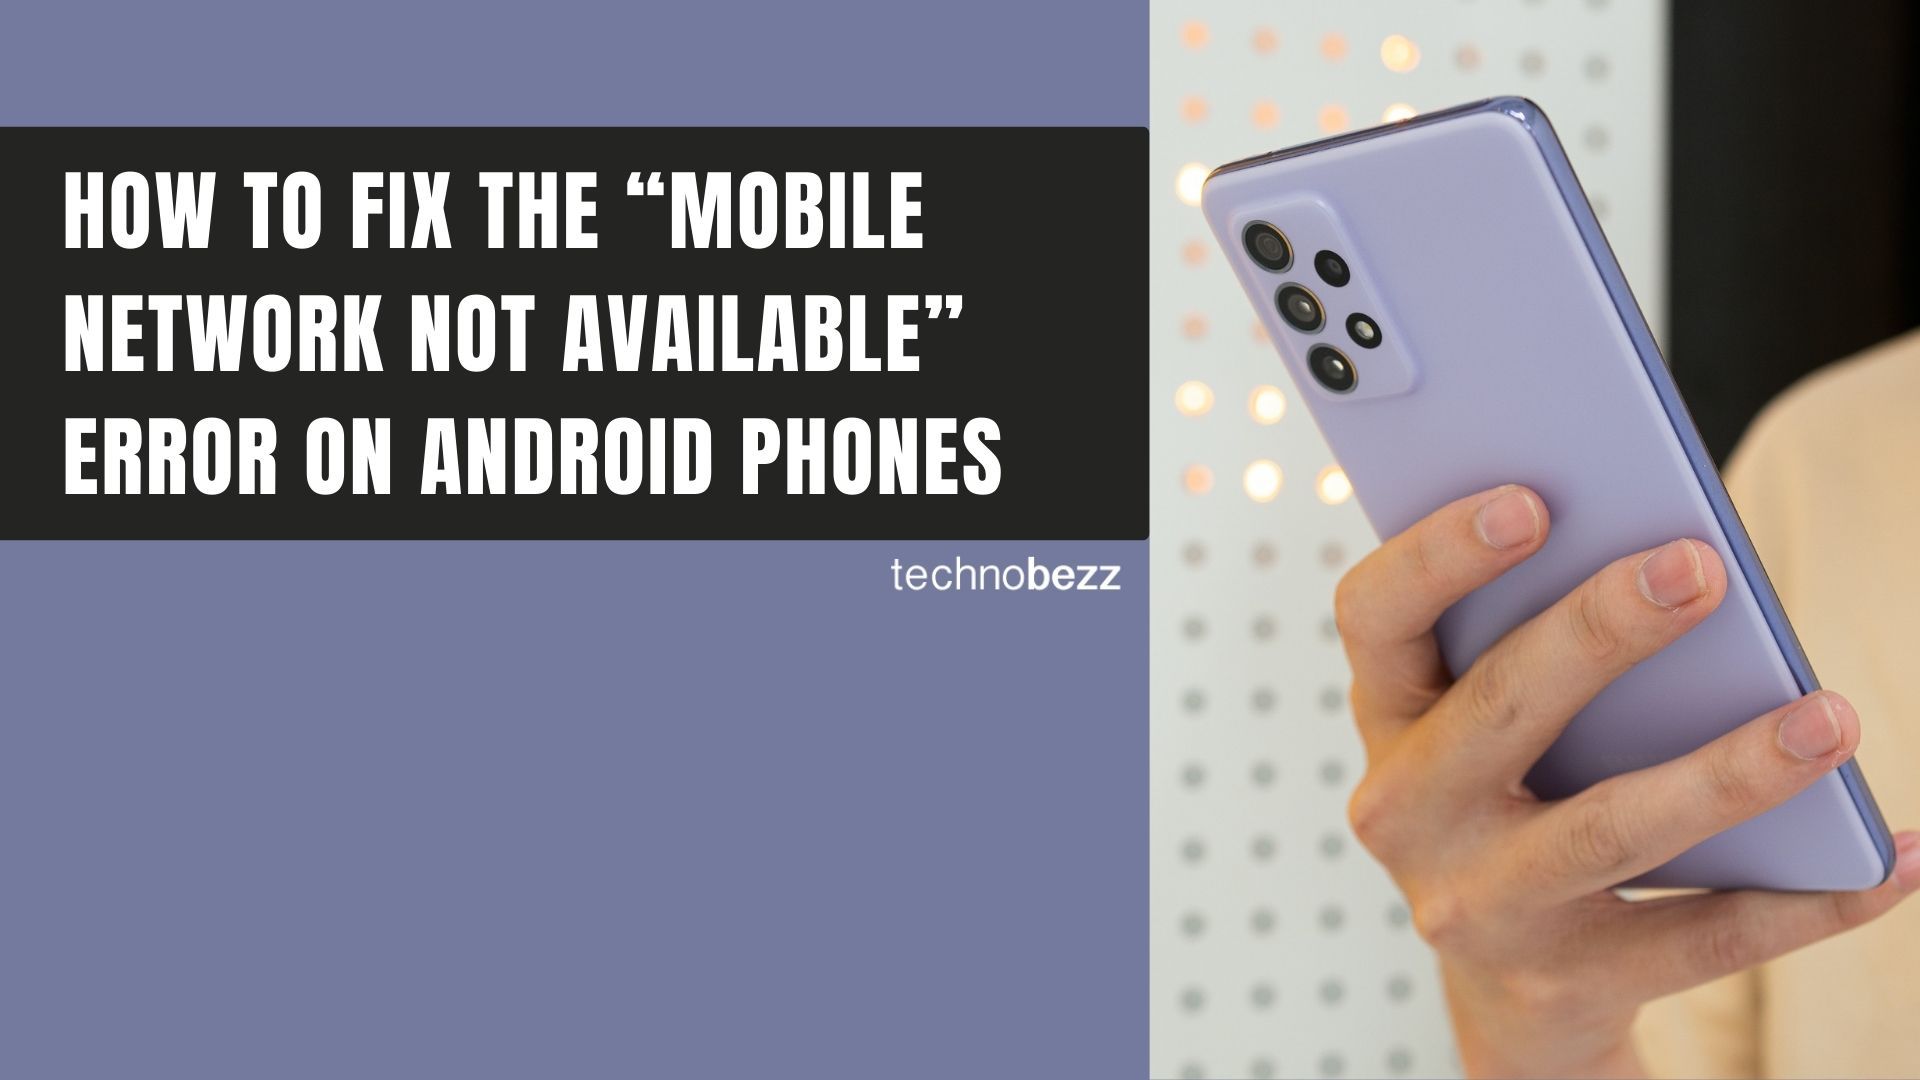 How To Fix The “Mobile Network Not Available” Error On Android Phones - Technobezz